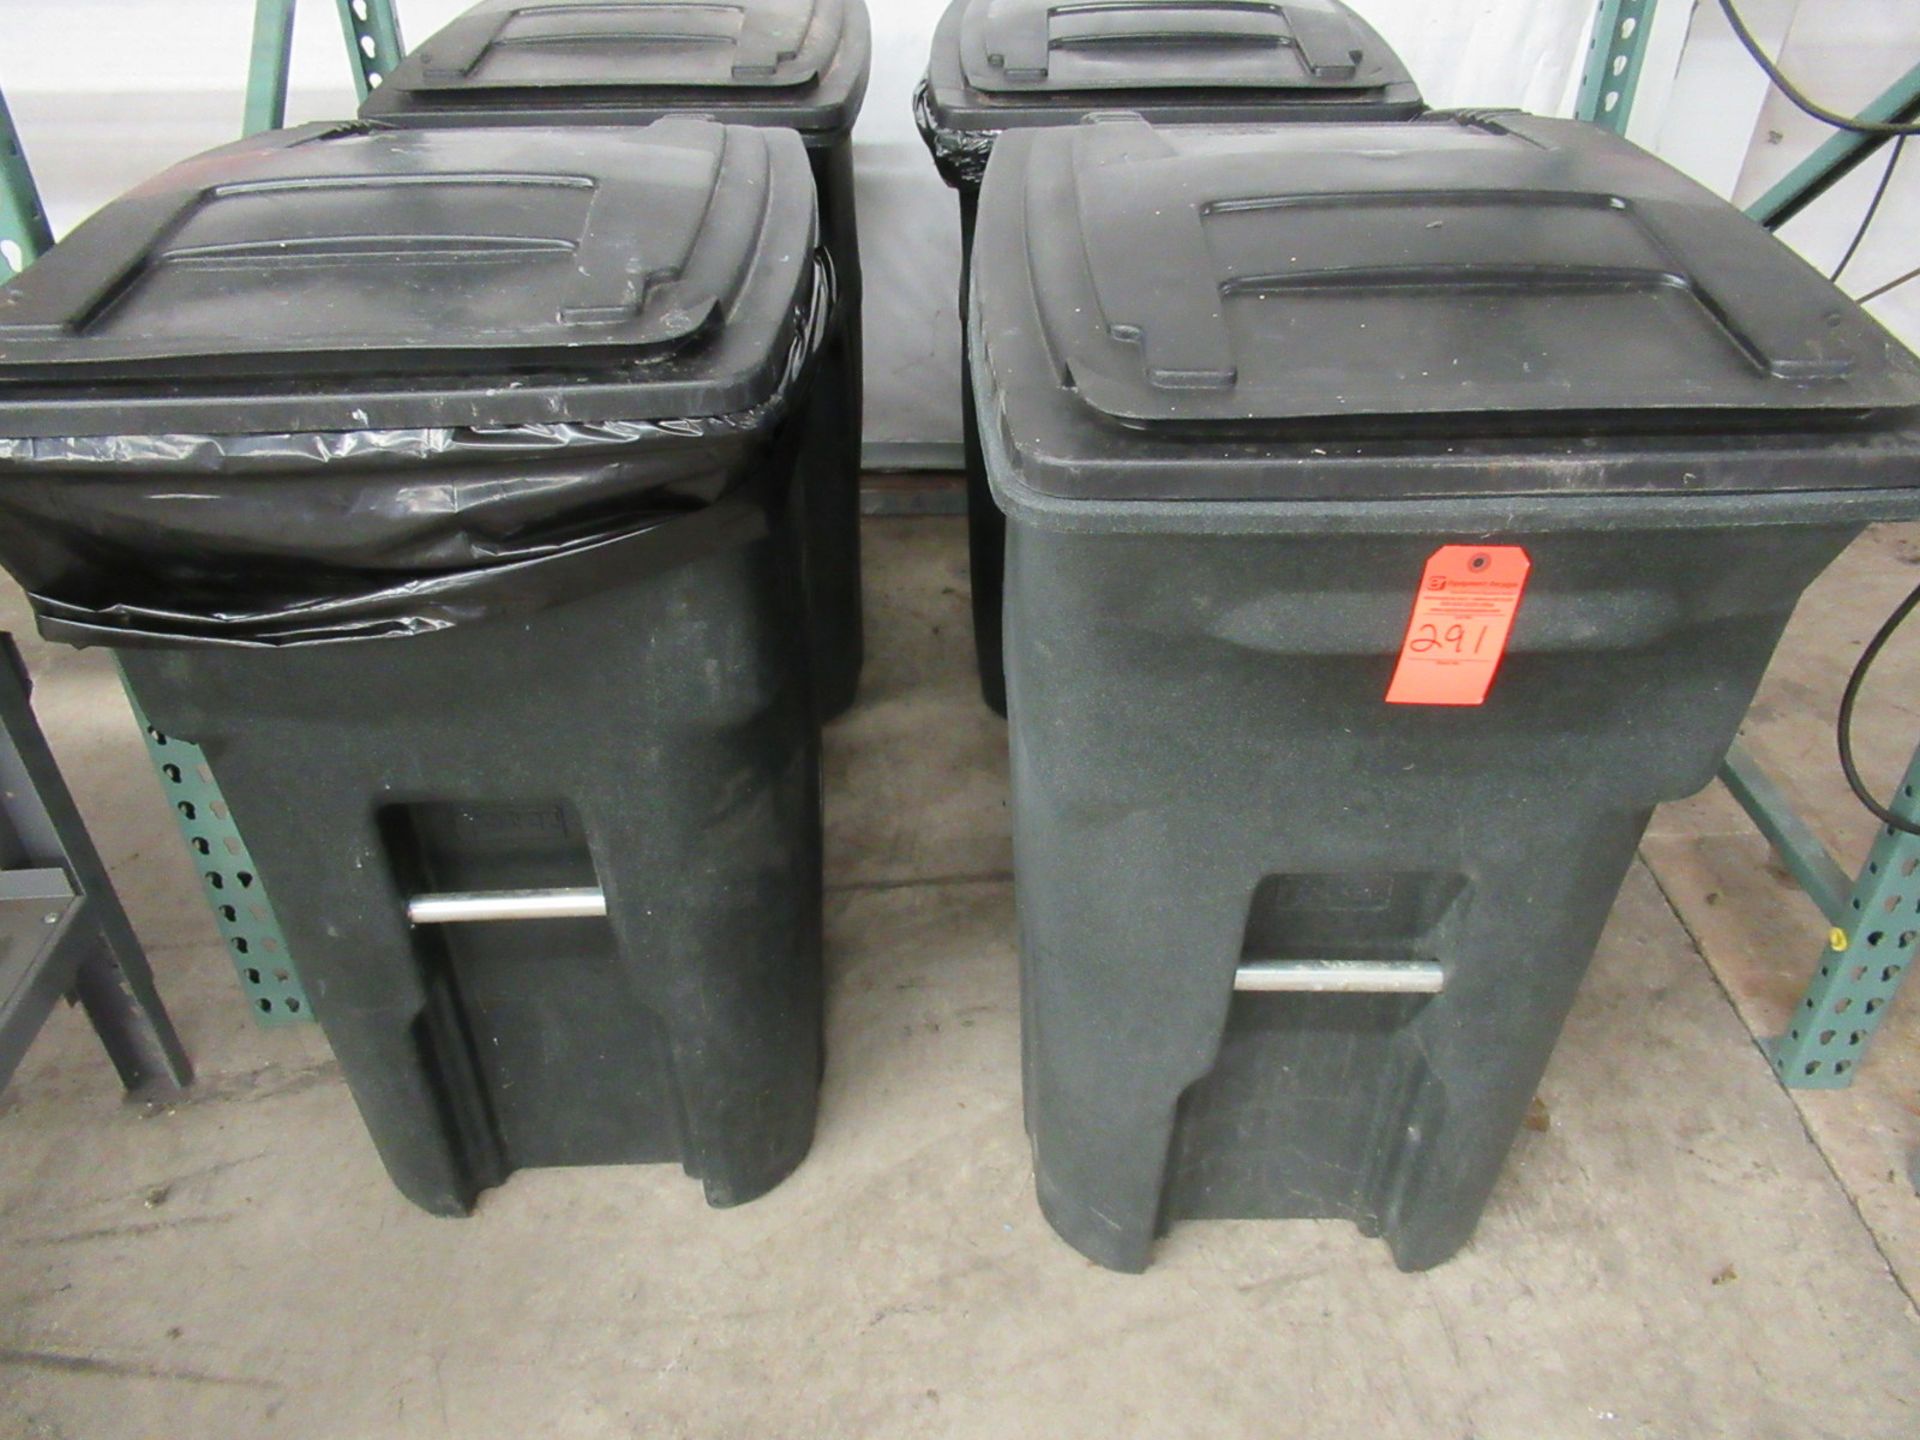 Toter 64 Gallon Garbage Cans Lot of 2